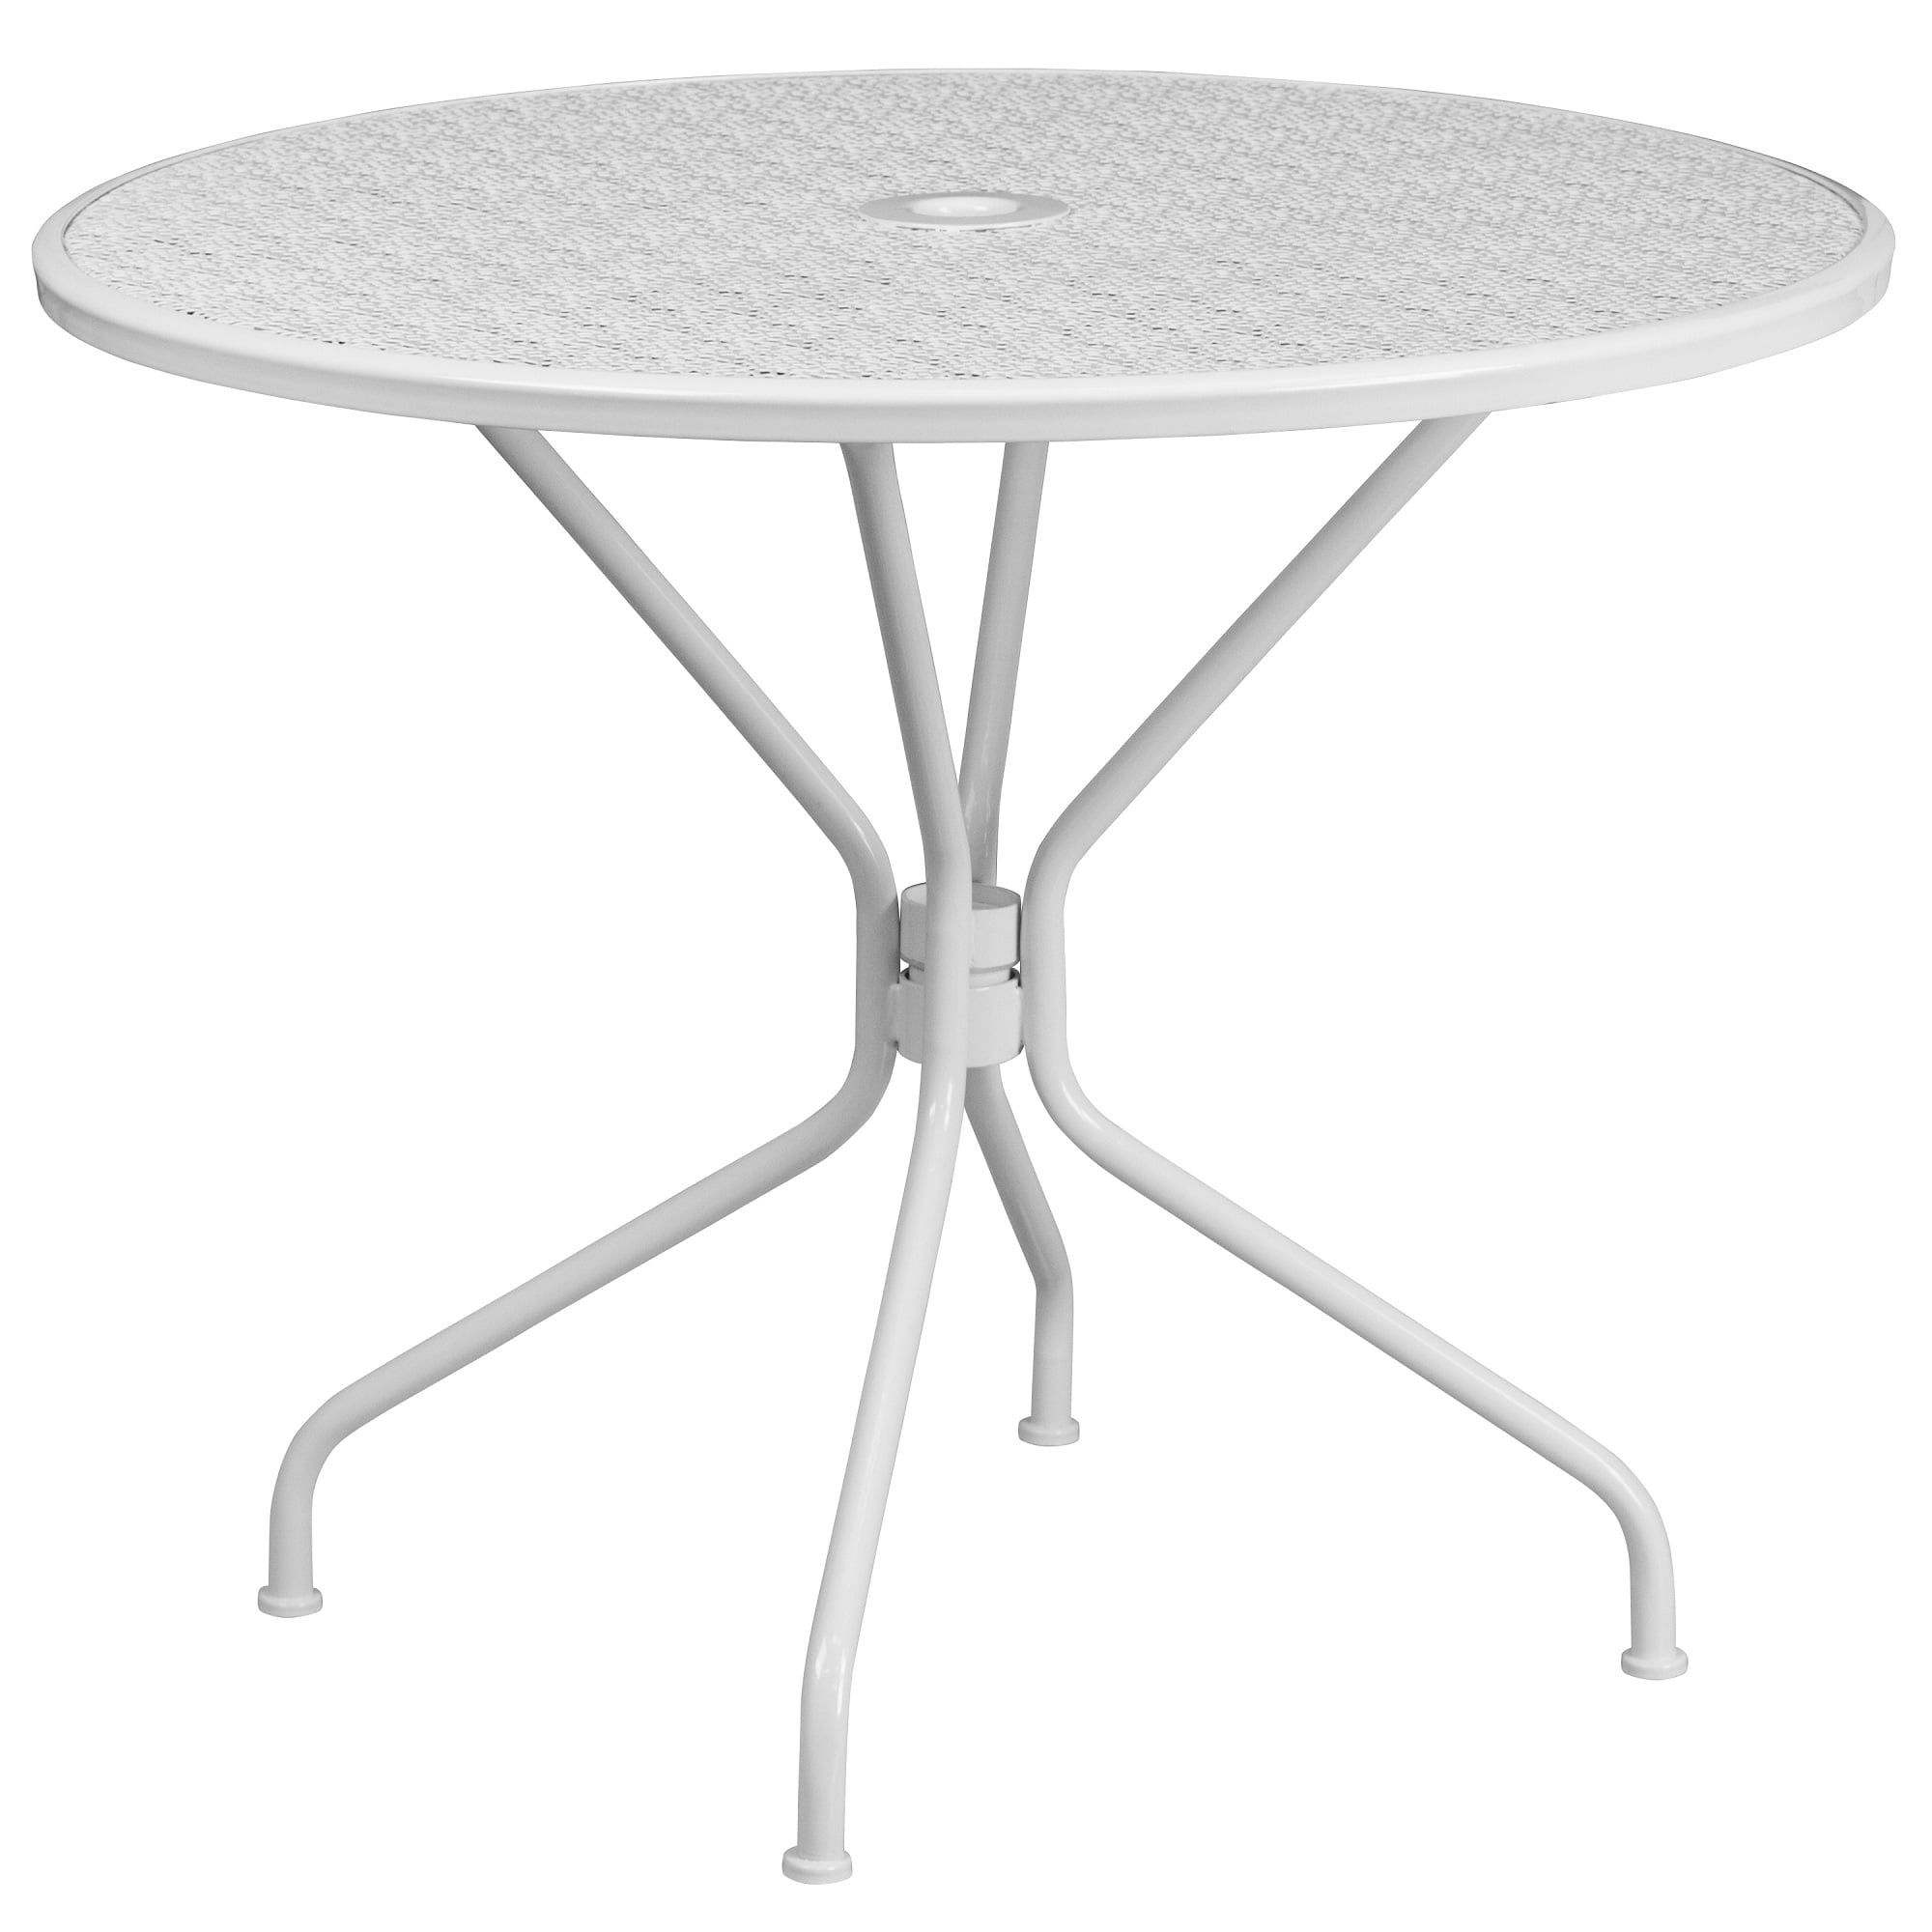 Round Outdoor Patio Table, Round Plastic Folding Table With Umbrella Hole